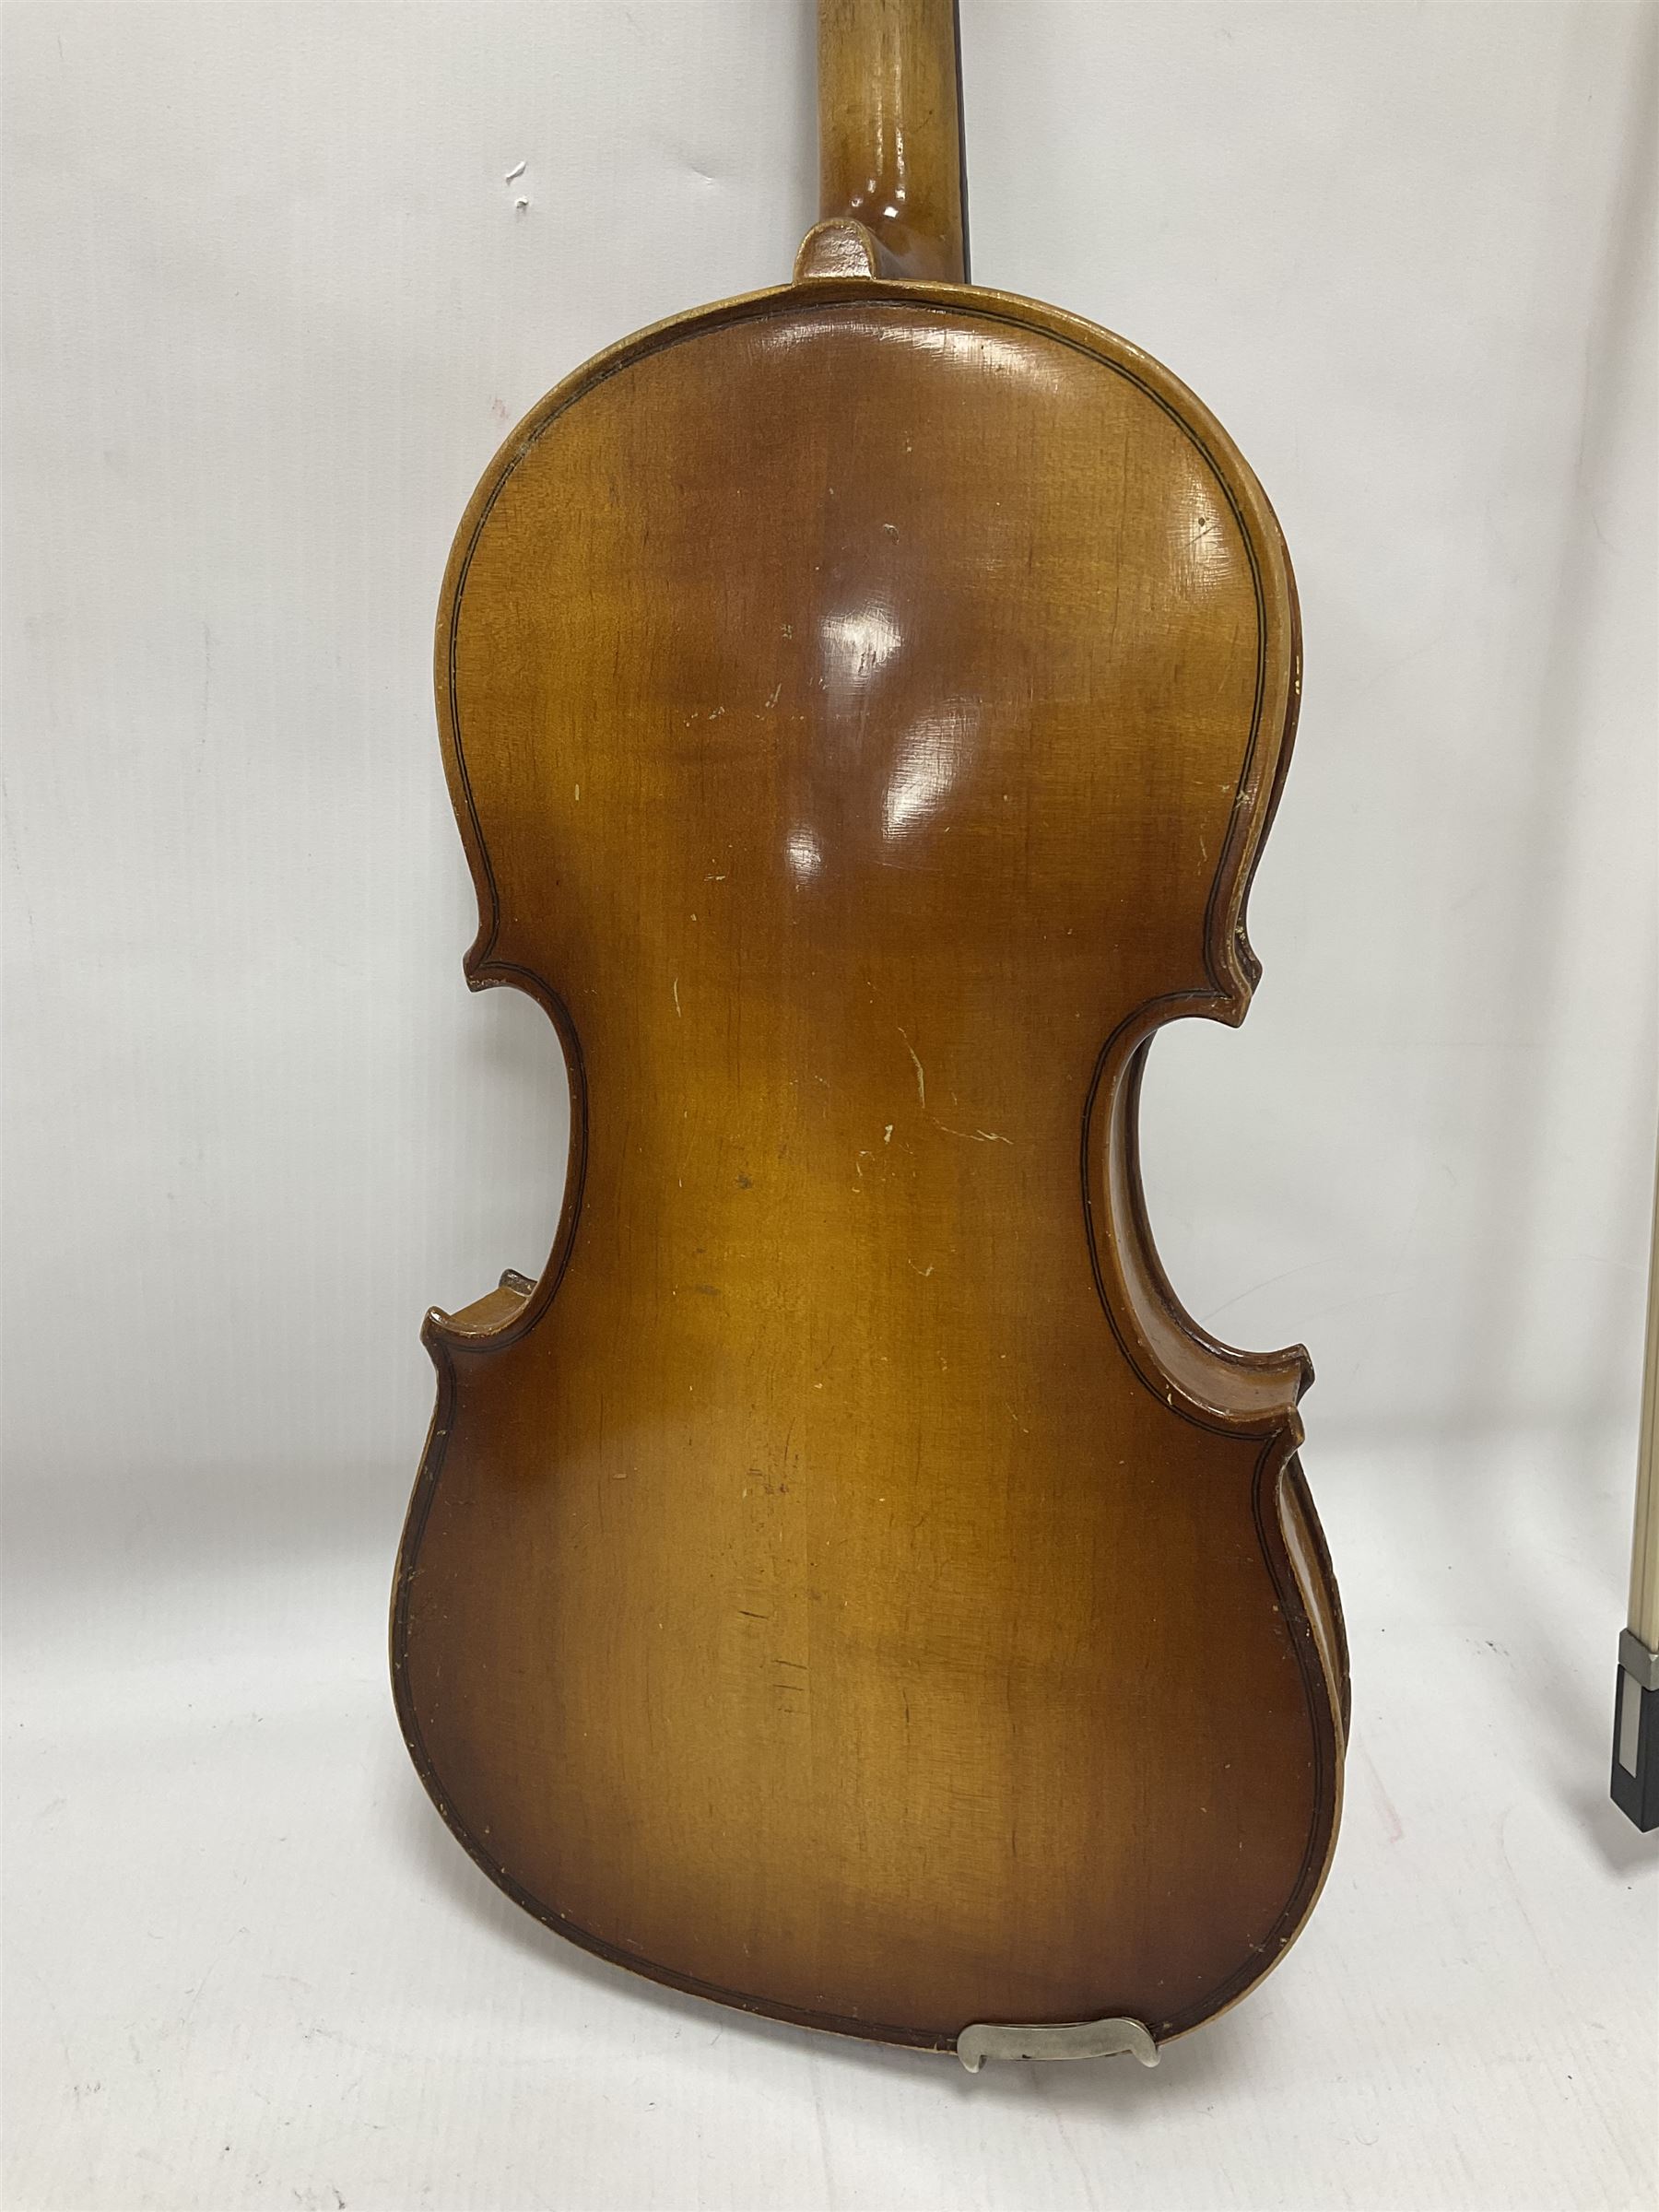 Full size Violin with a maple back and spruce top - Image 10 of 18